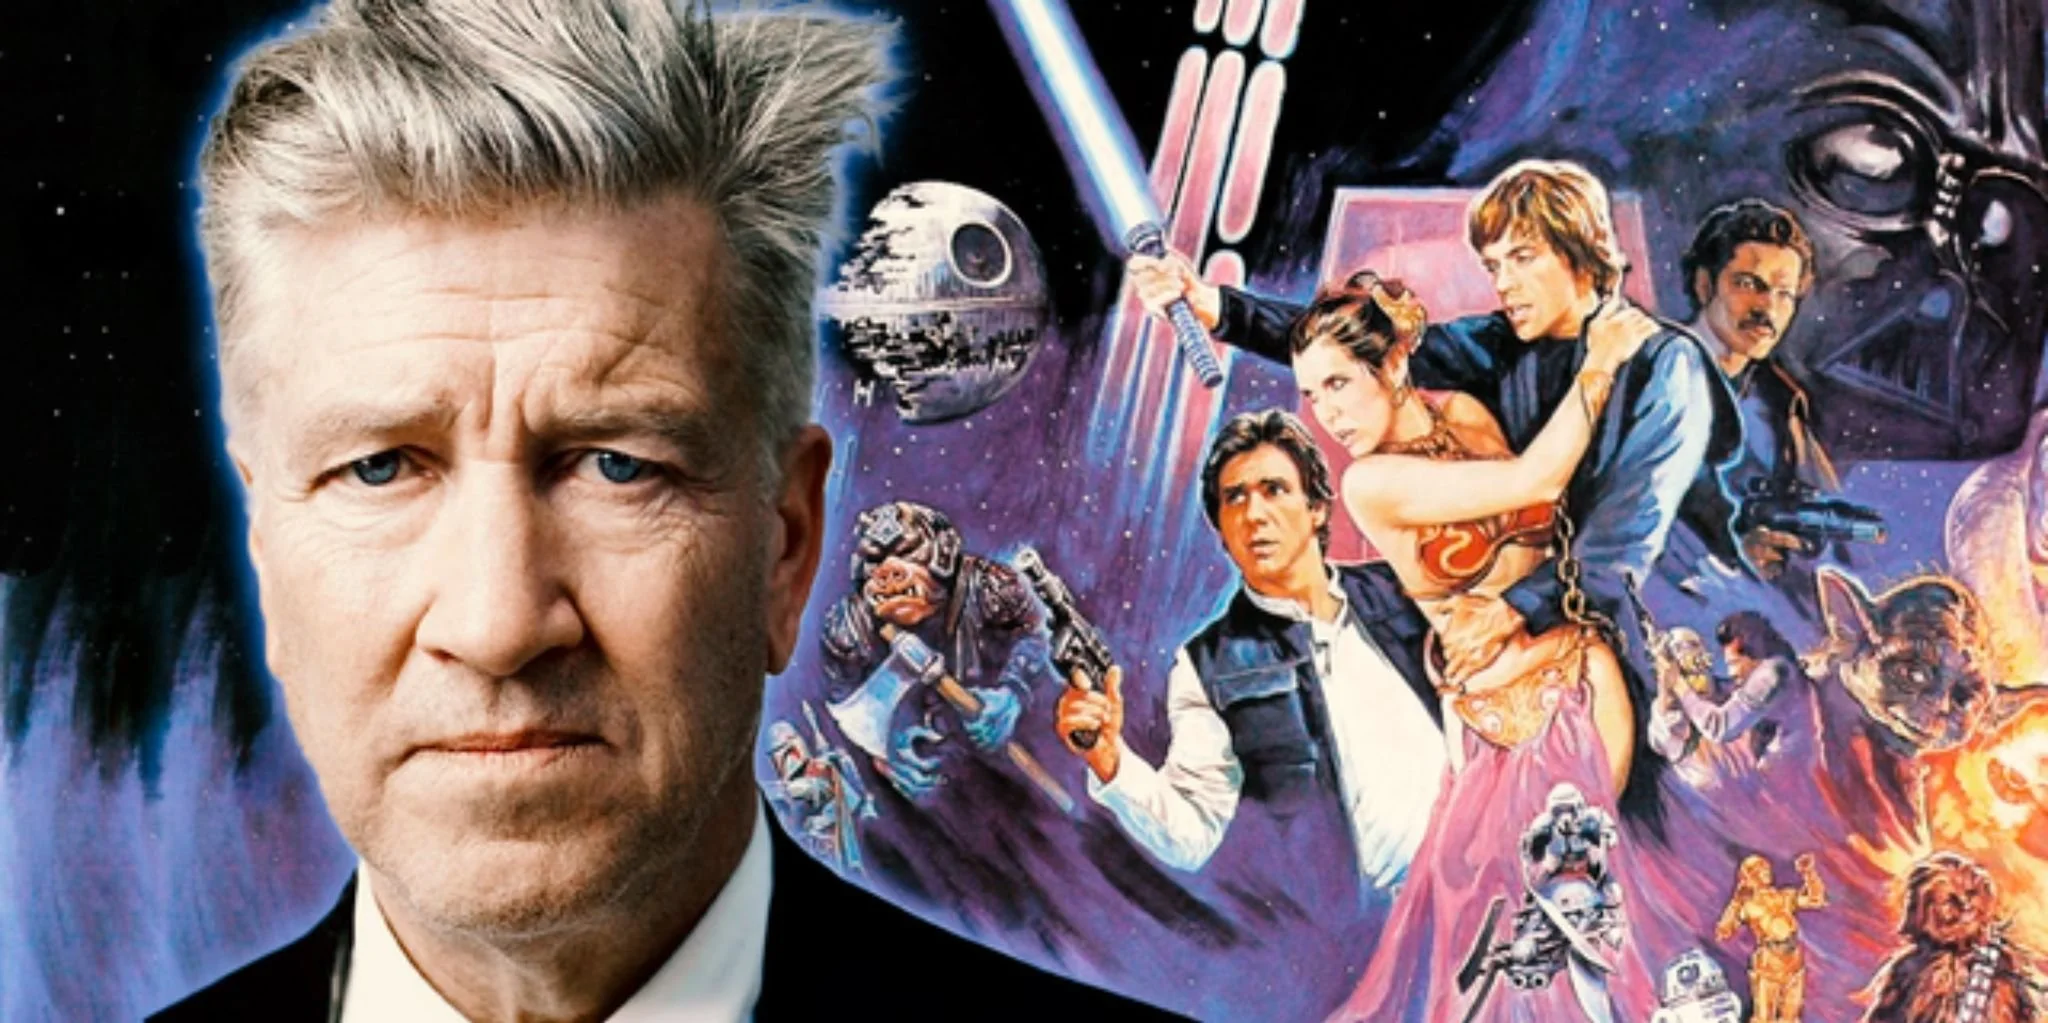 Why Did David Lynch Turn Down Directing a Star Wars Movie? Inside the Surprising Decision